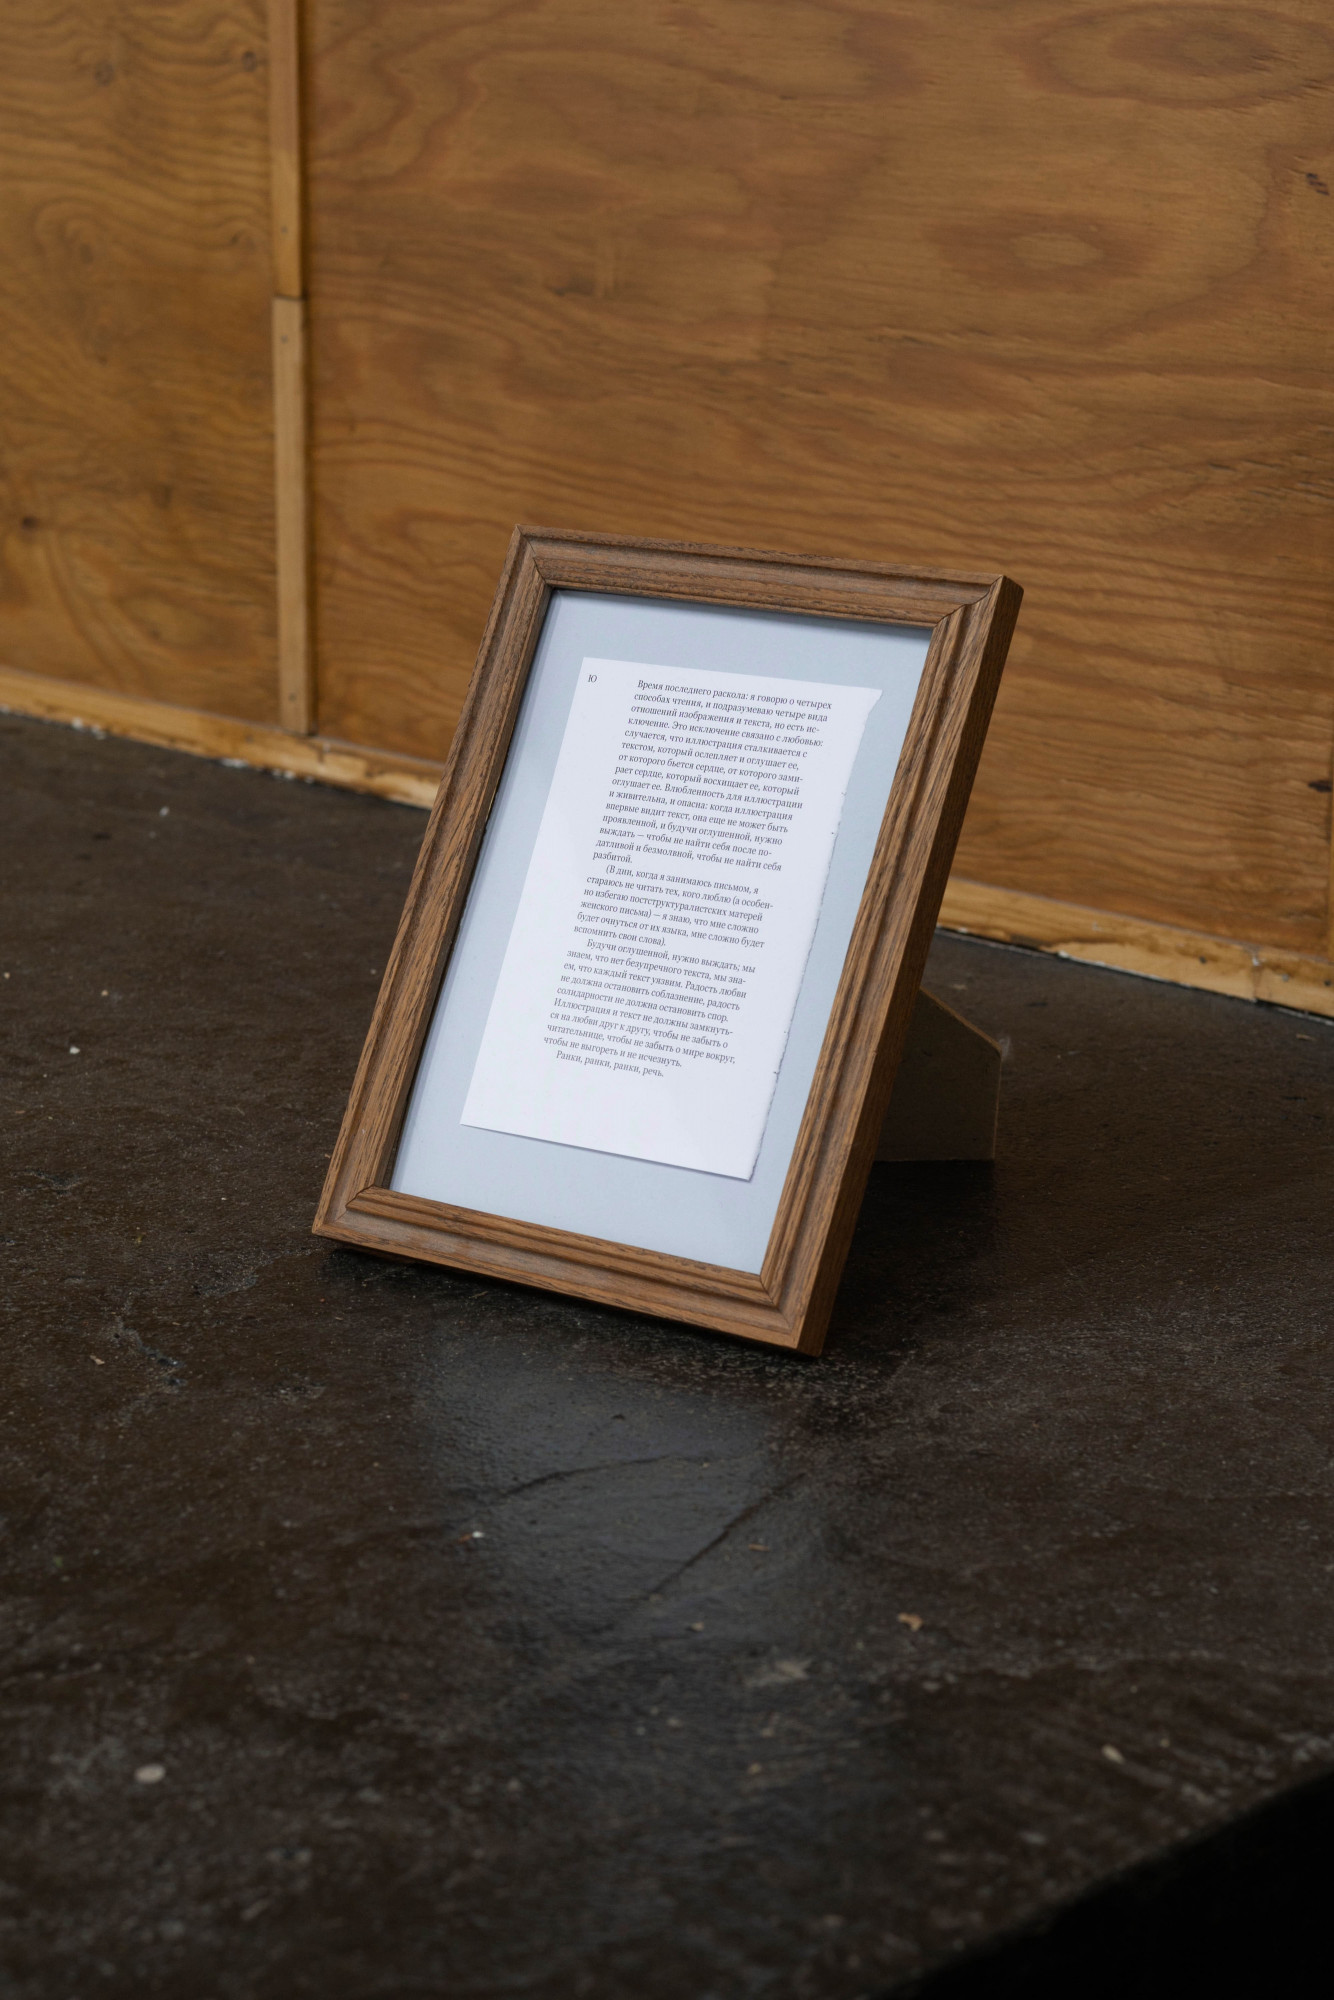 “Being in love brings both life and danger to the illustration.” The Unshockheaded Doubles Boredom…, 2020. The framed text describes different ways in which writing and illustration can coexist